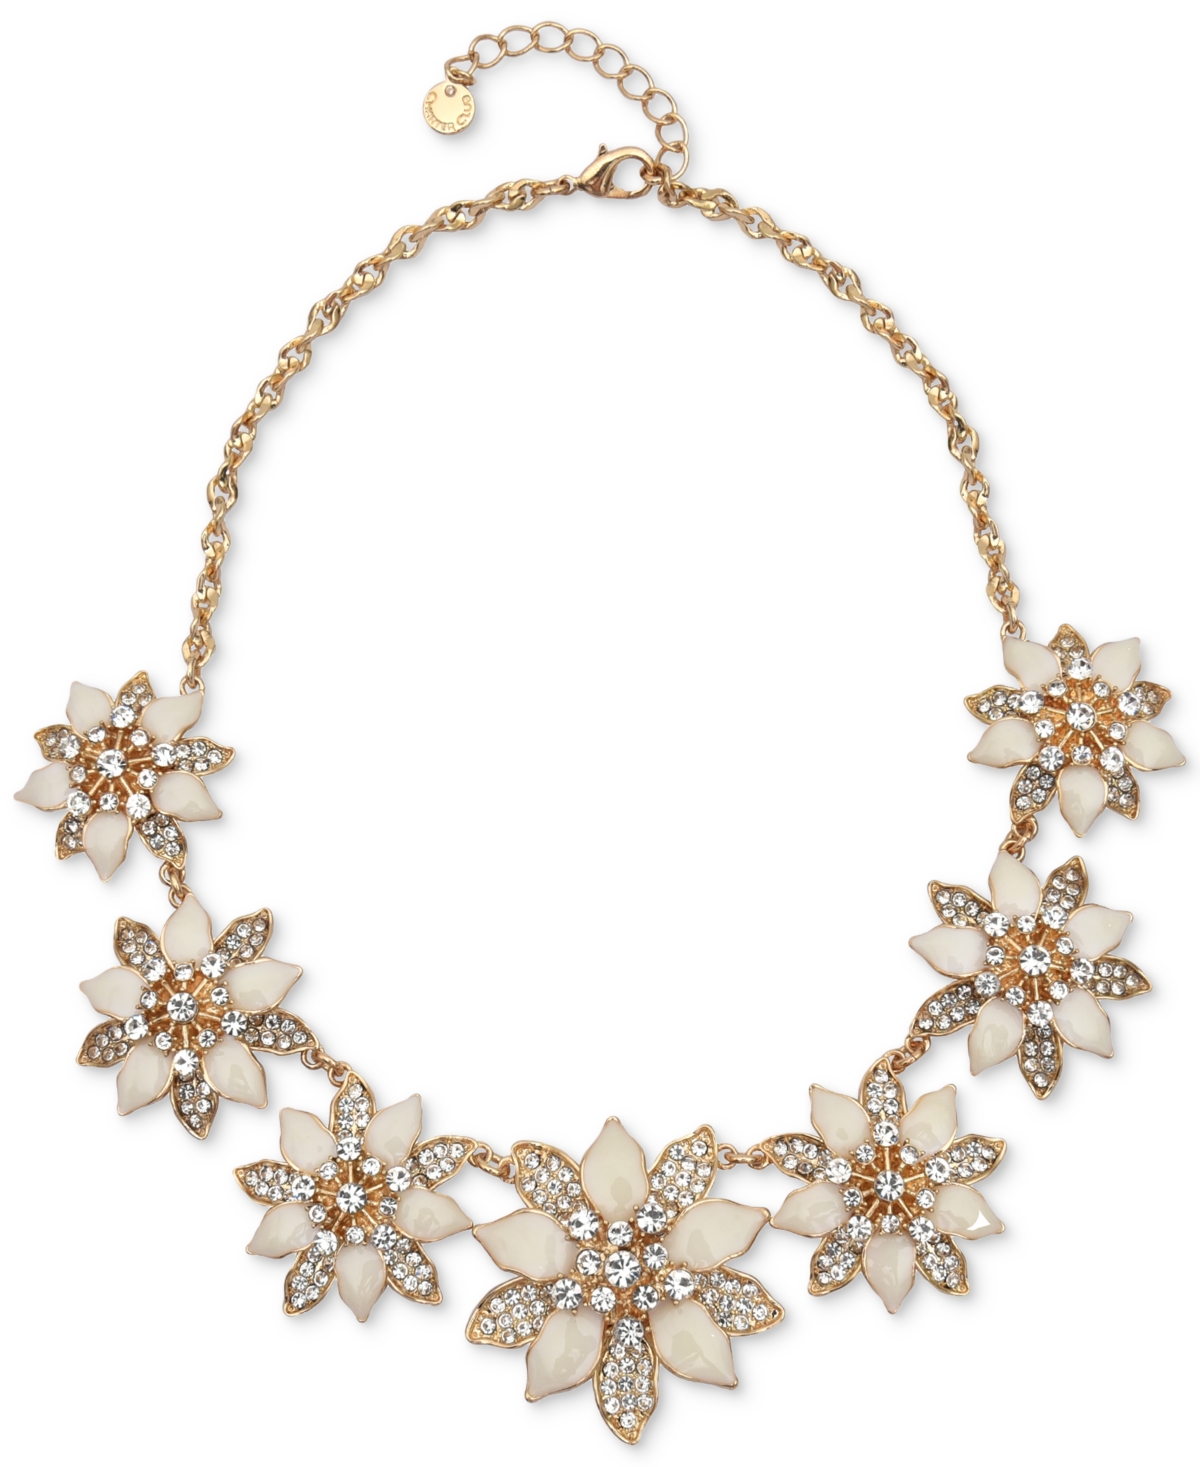 Charter Club Gold-Tone Crystal & Stone Poinsettia Statement Necklace, 17